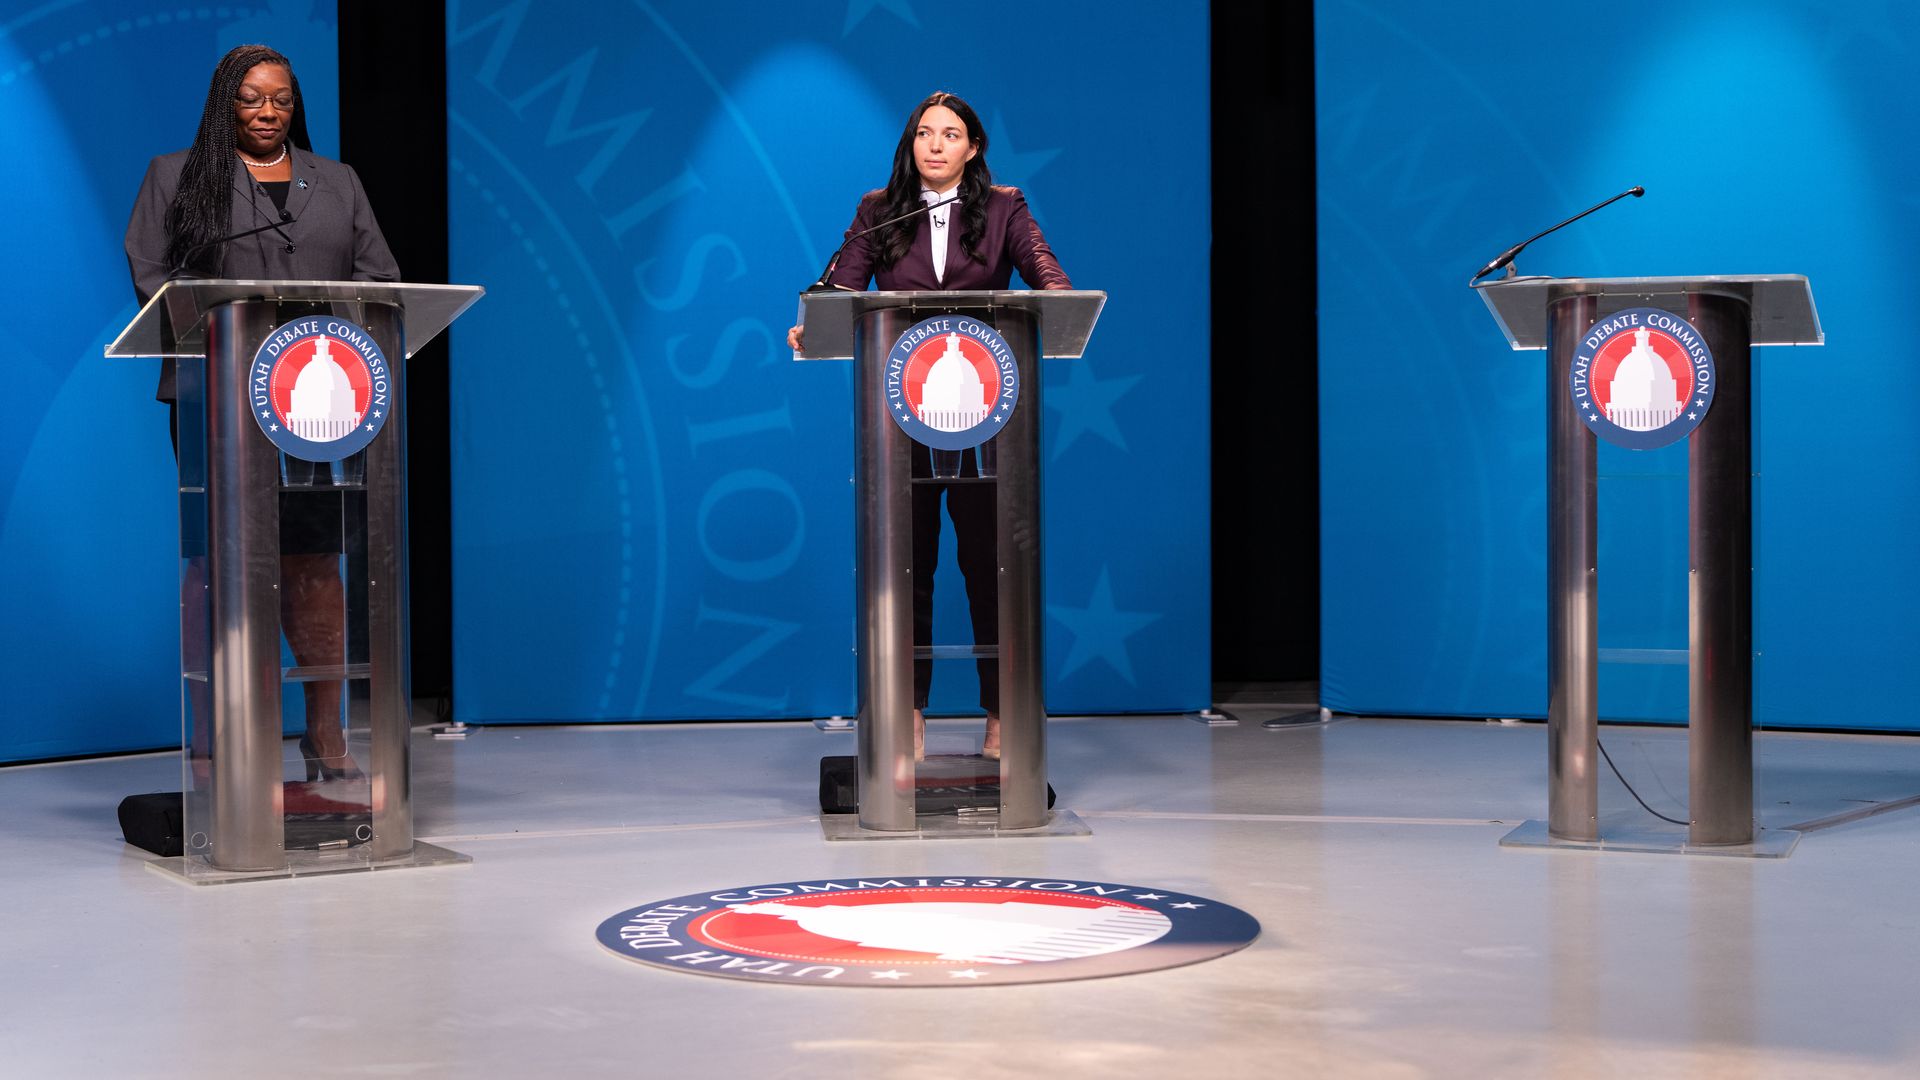 January Walker stands next to an empty podium during a debate.